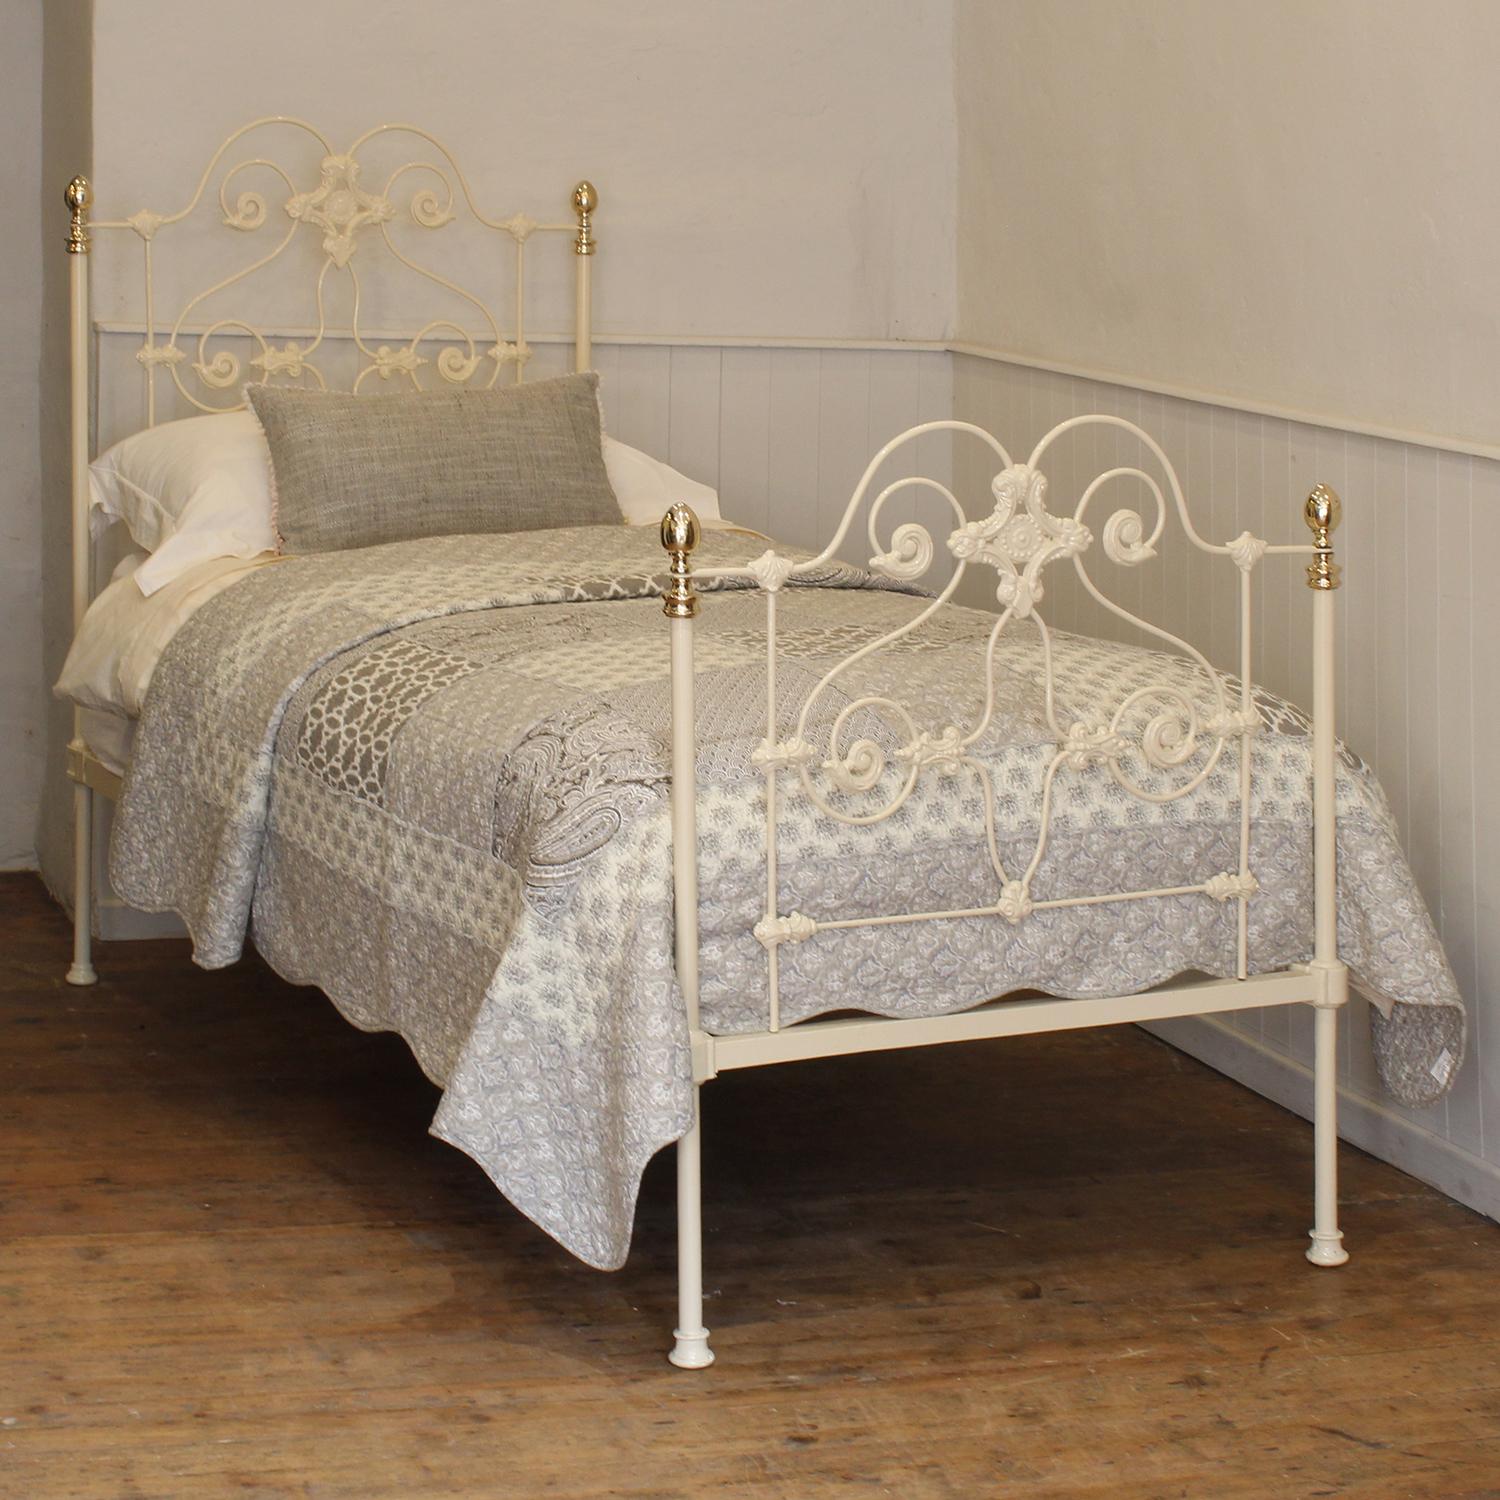 A highly ornate cast iron single bed from the height of the Victorian era finished in cream with oval knobs.
This bed takes a standard UK single 3ft wide x 6ft 3in long base and mattress, but will take a US twin 38 inch wide base and mattress with a